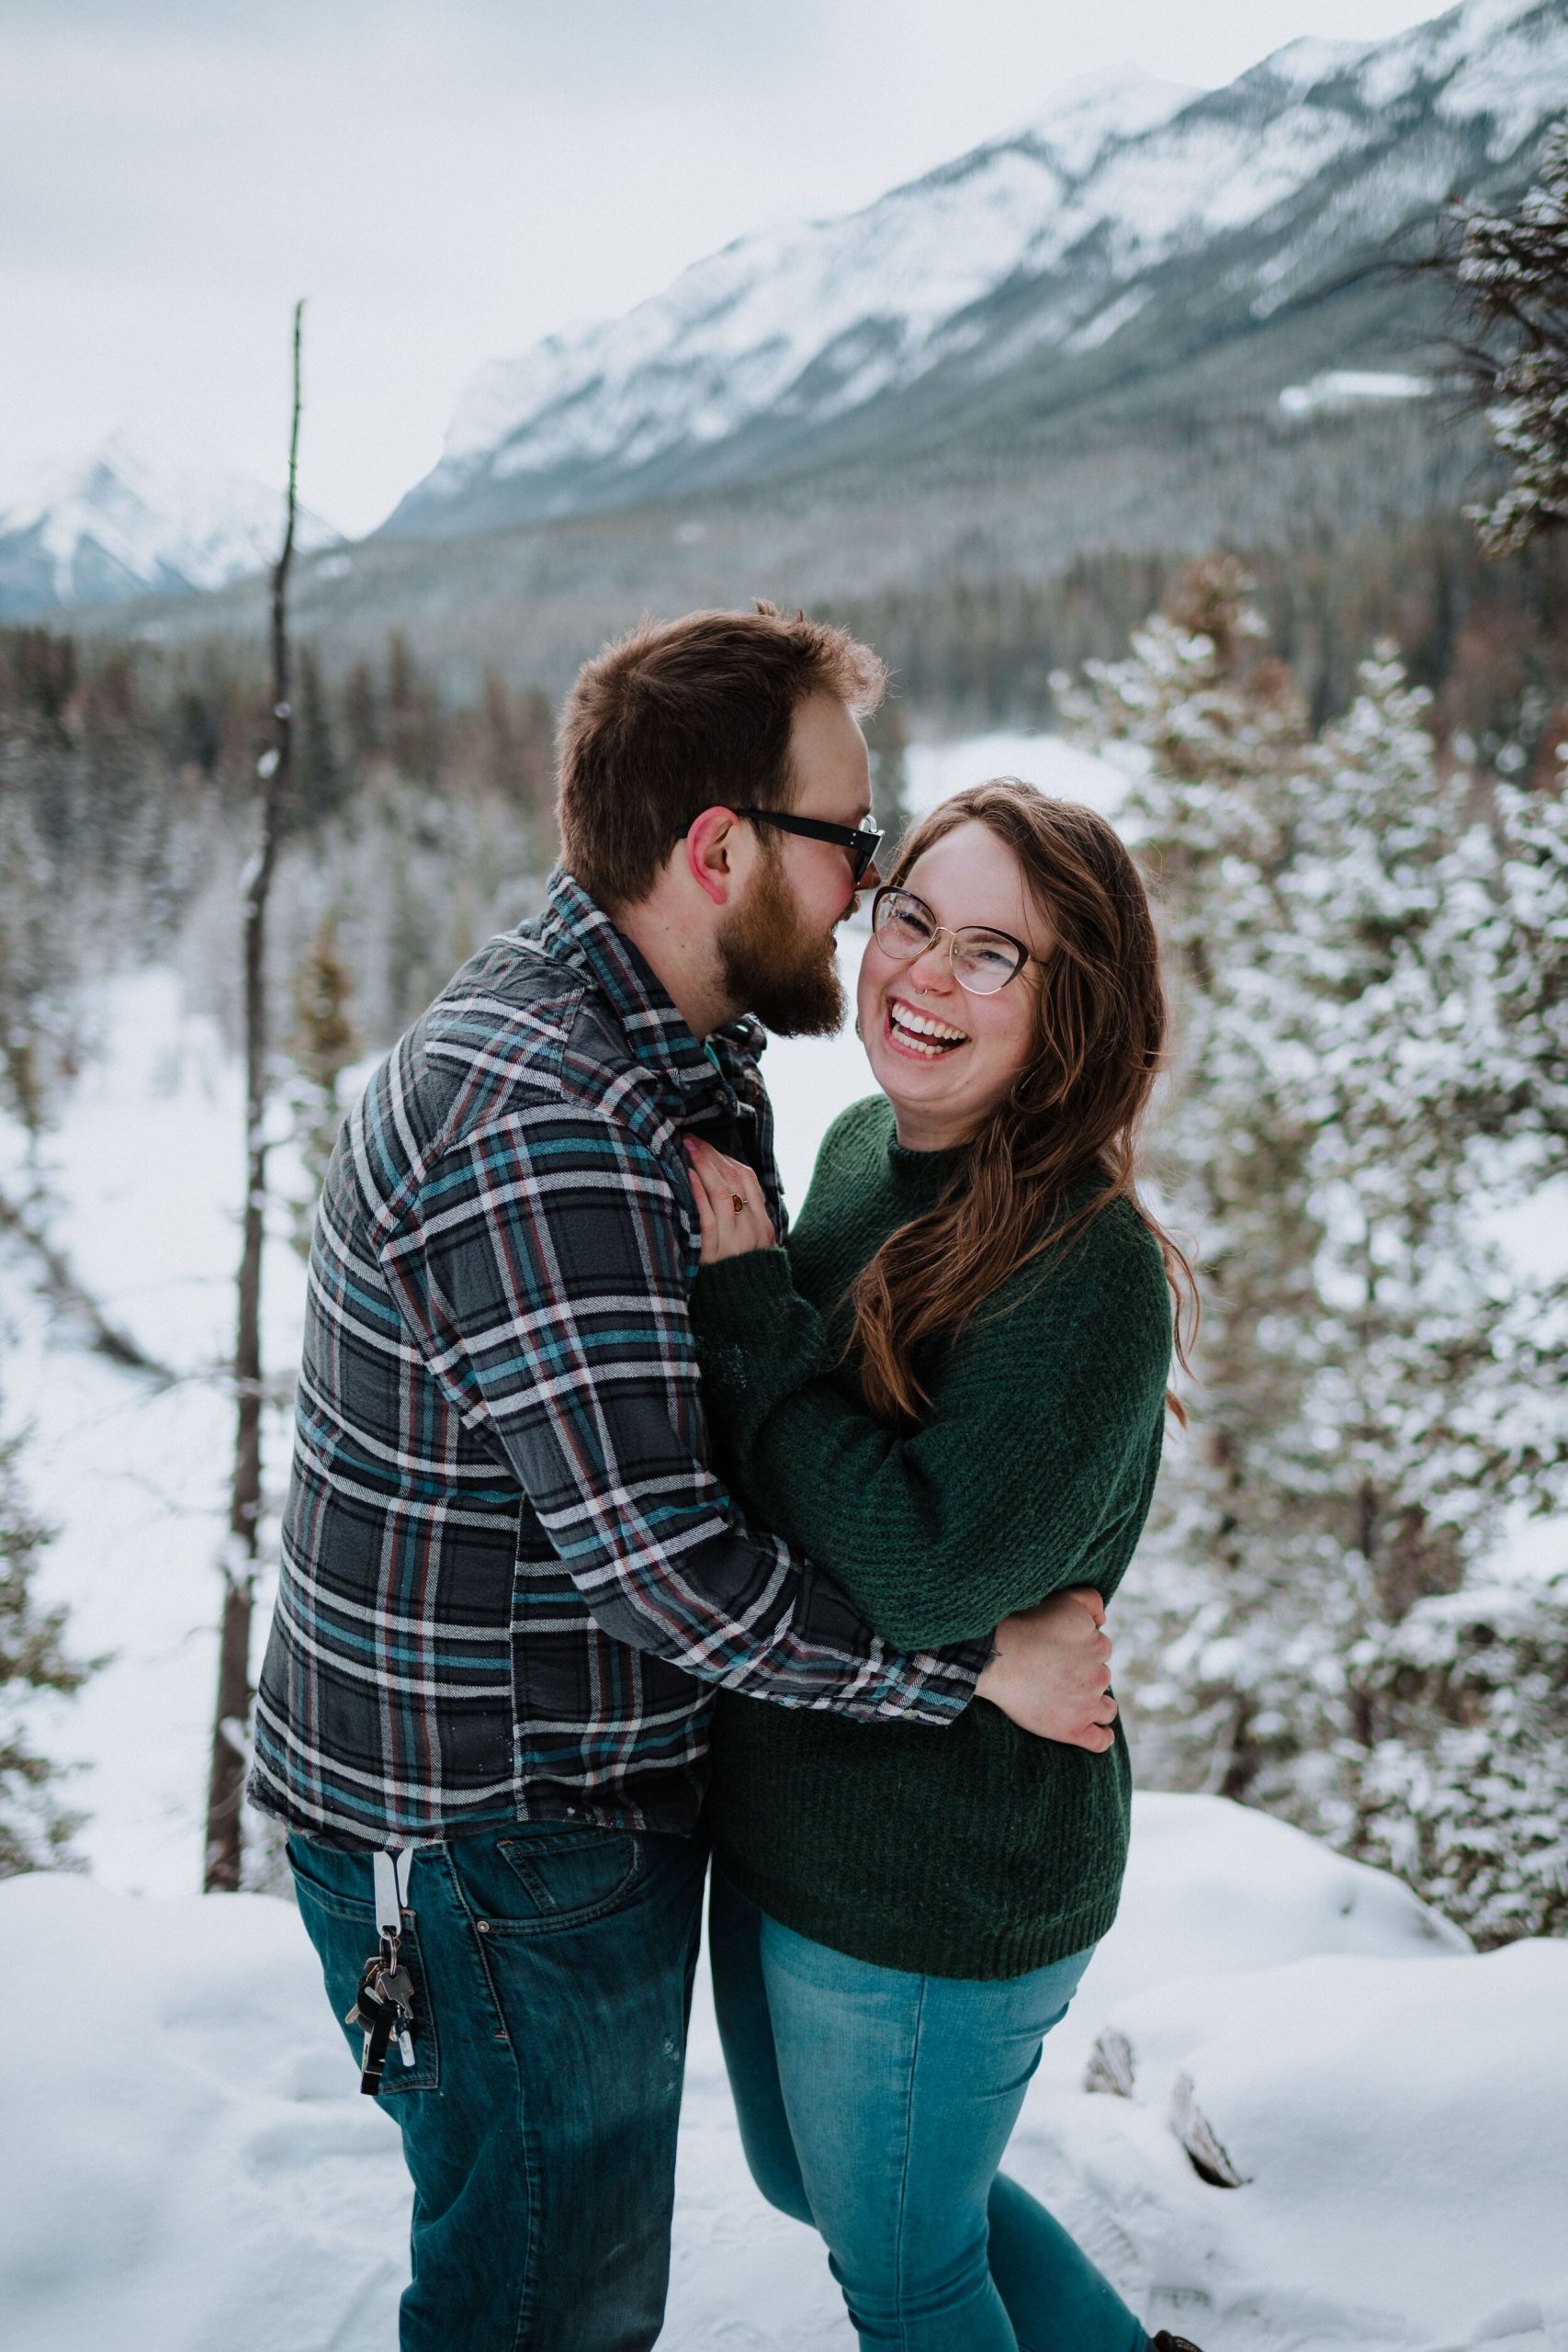 couple laughing in the snowy mountains of alberta canada